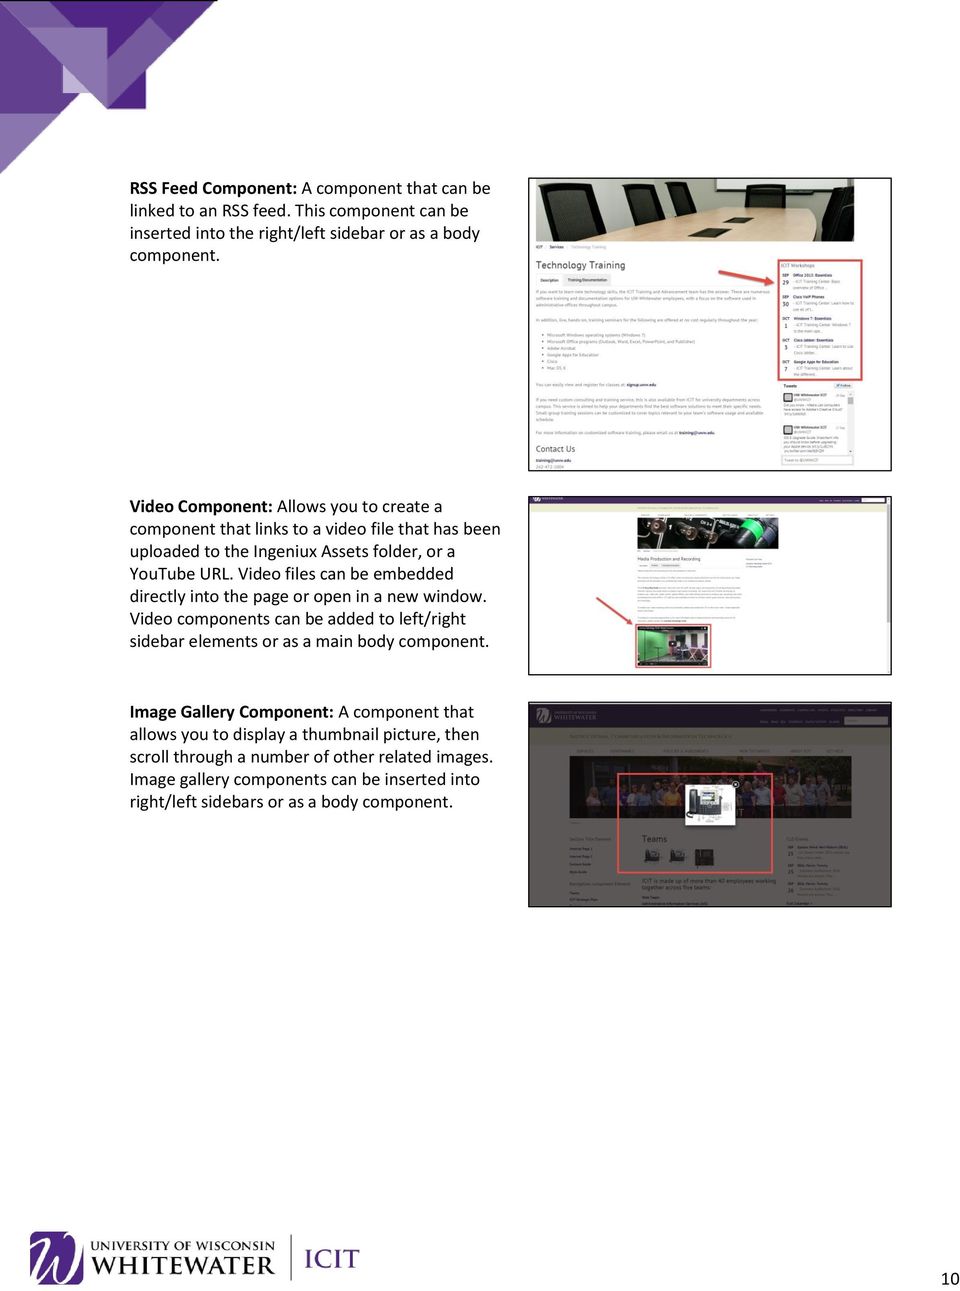 Video files can be embedded directly into the page or open in a new window. Video components can be added to left/right sidebar elements or as a main body component.